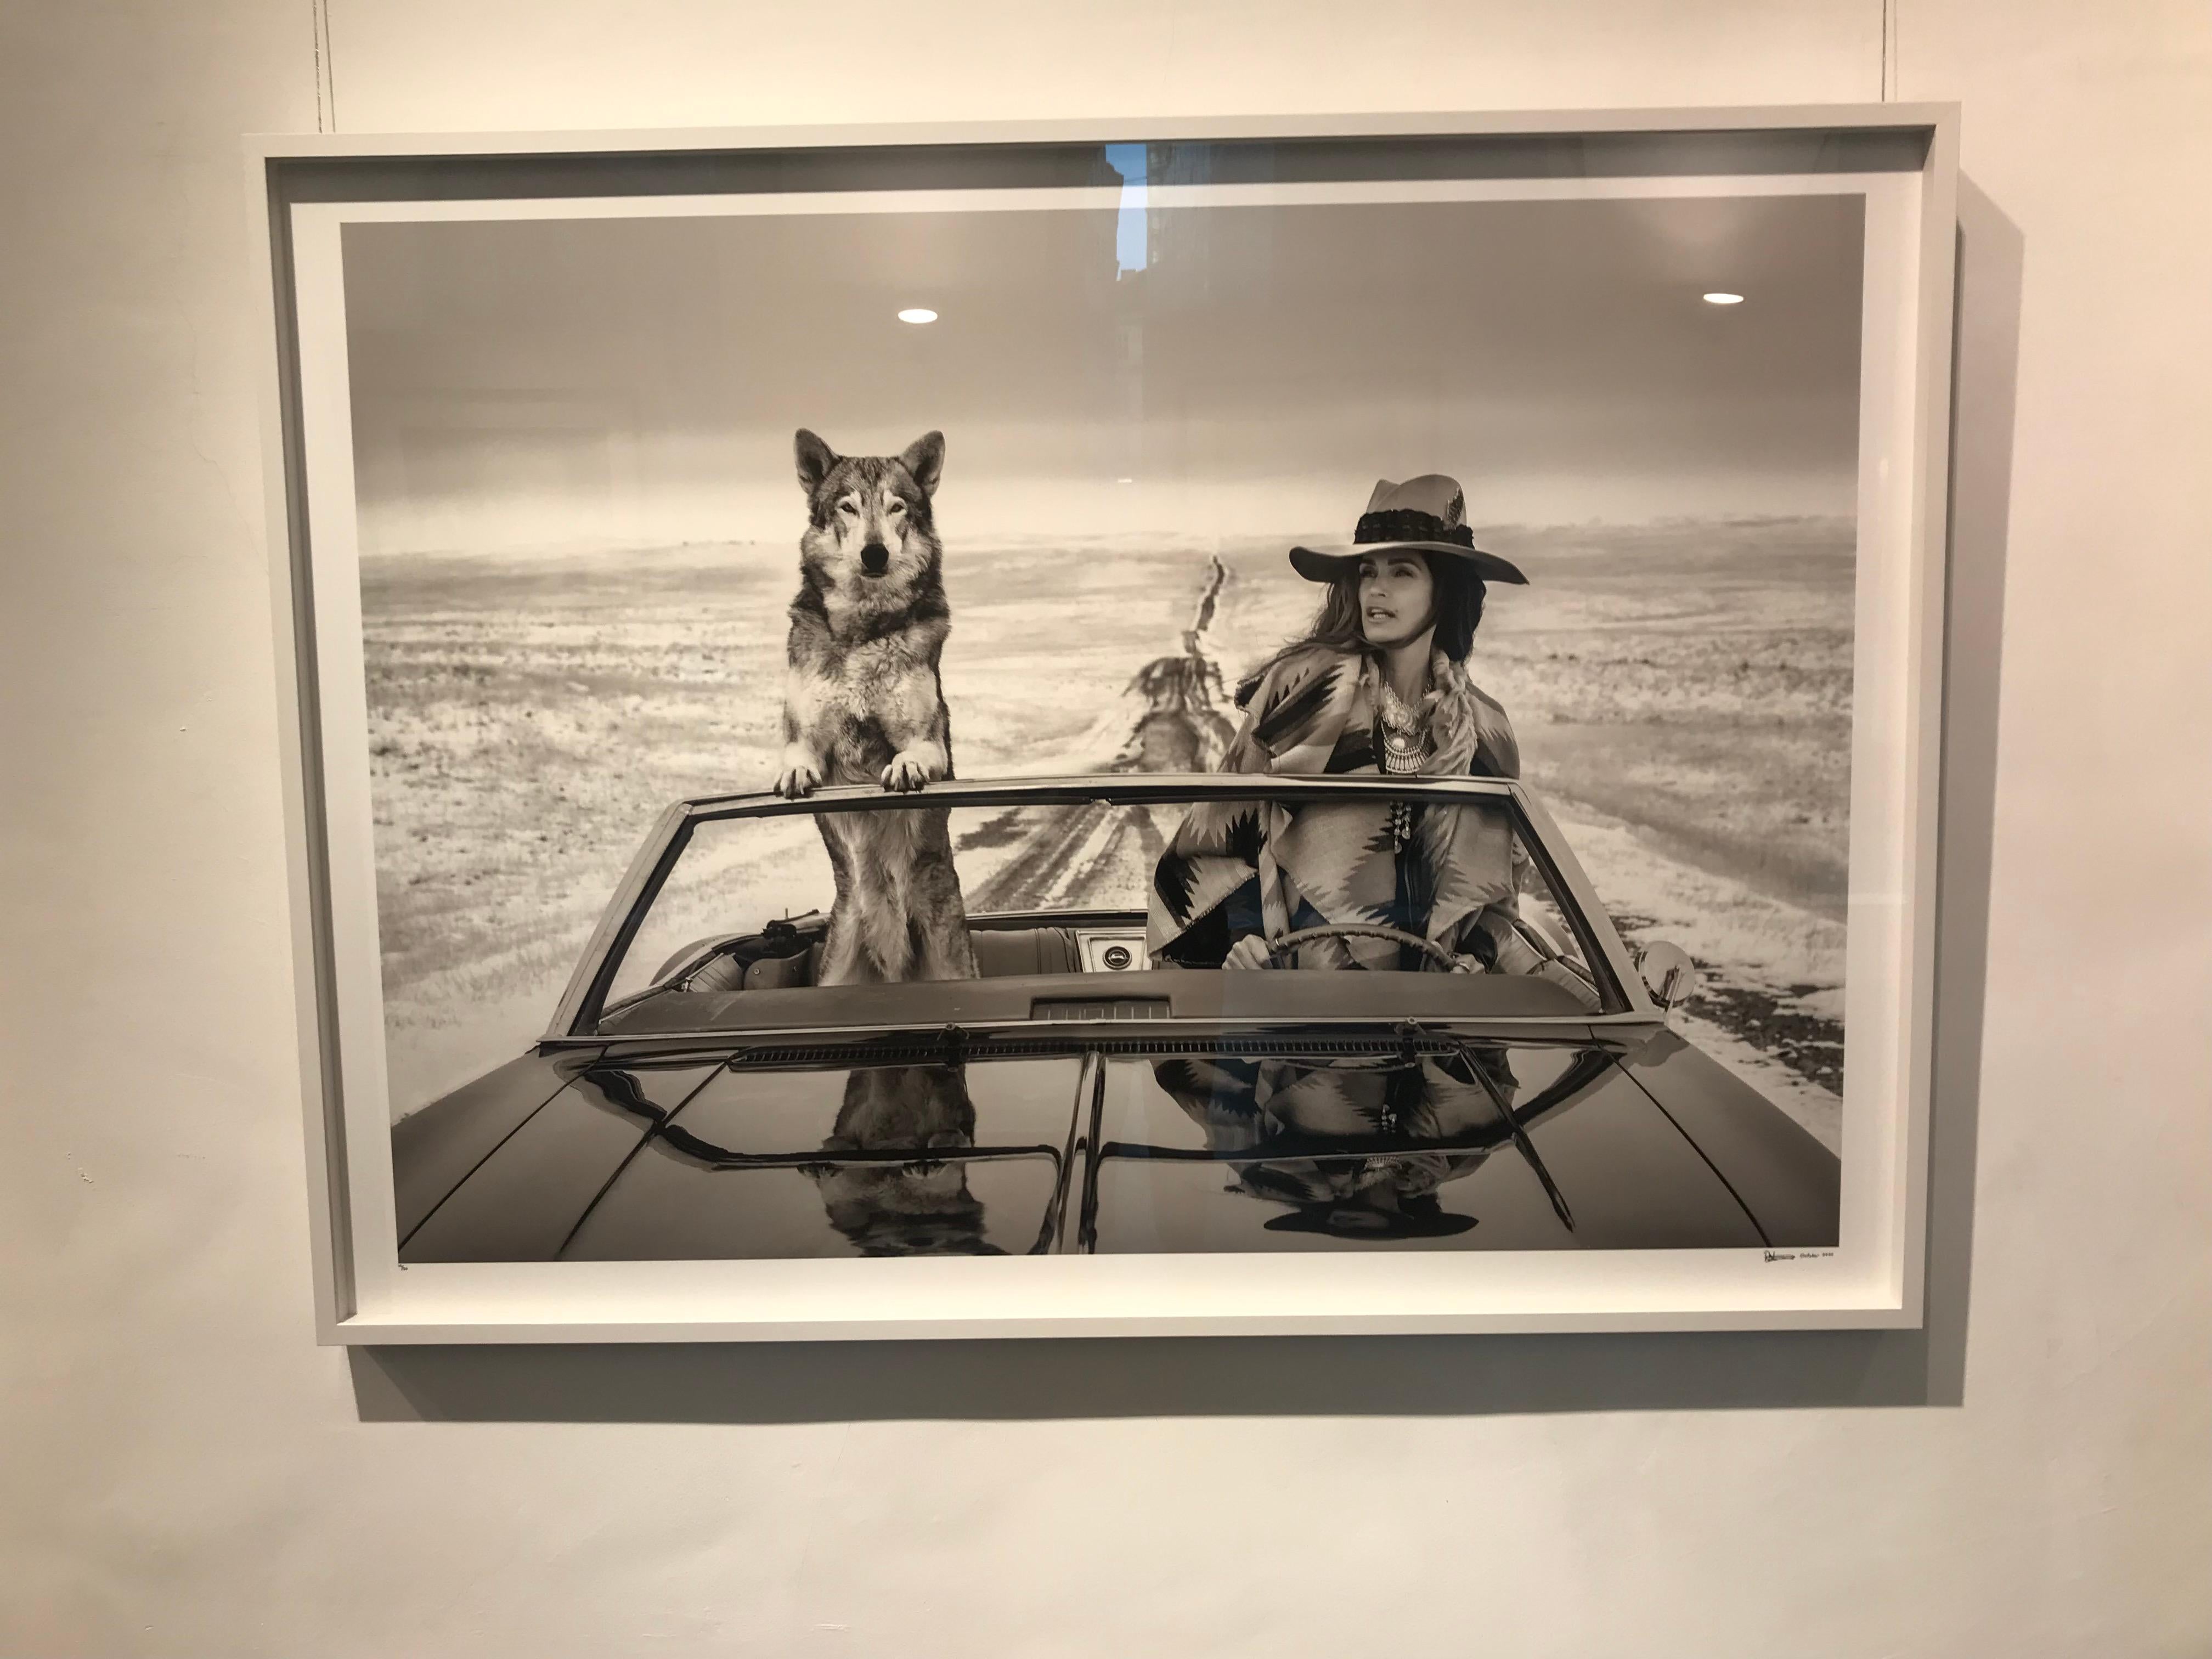 On the road again - the supermodel Cindy Crawford in a car with a wolf - Photograph by David Yarrow